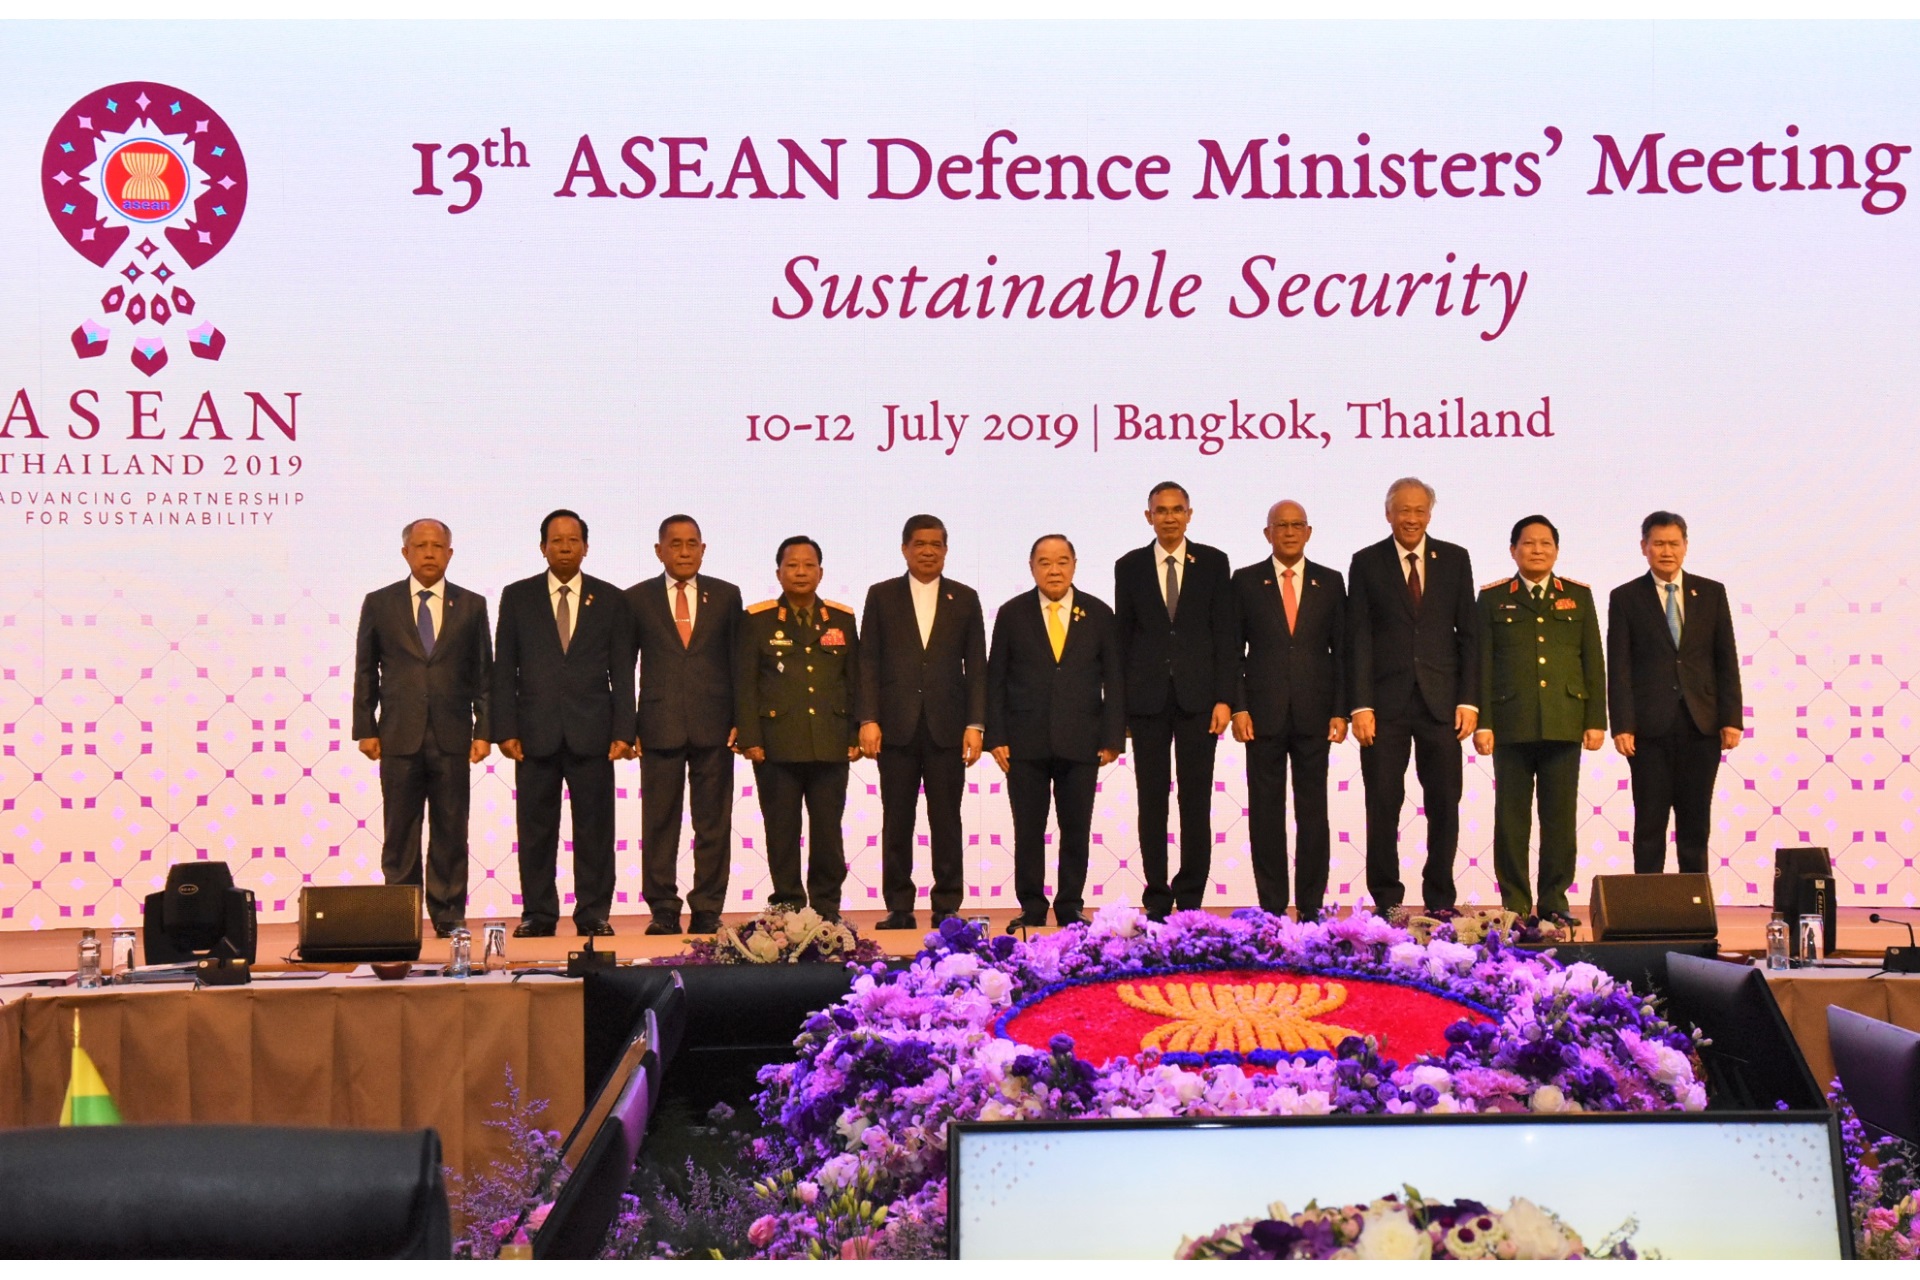 Minister for Defence Dr Ng Eng Hen (third from right) with other ASEAN Defence Ministers at the 13th ASEAN Defence Ministers' Meeting (ADMM) in Thailand.